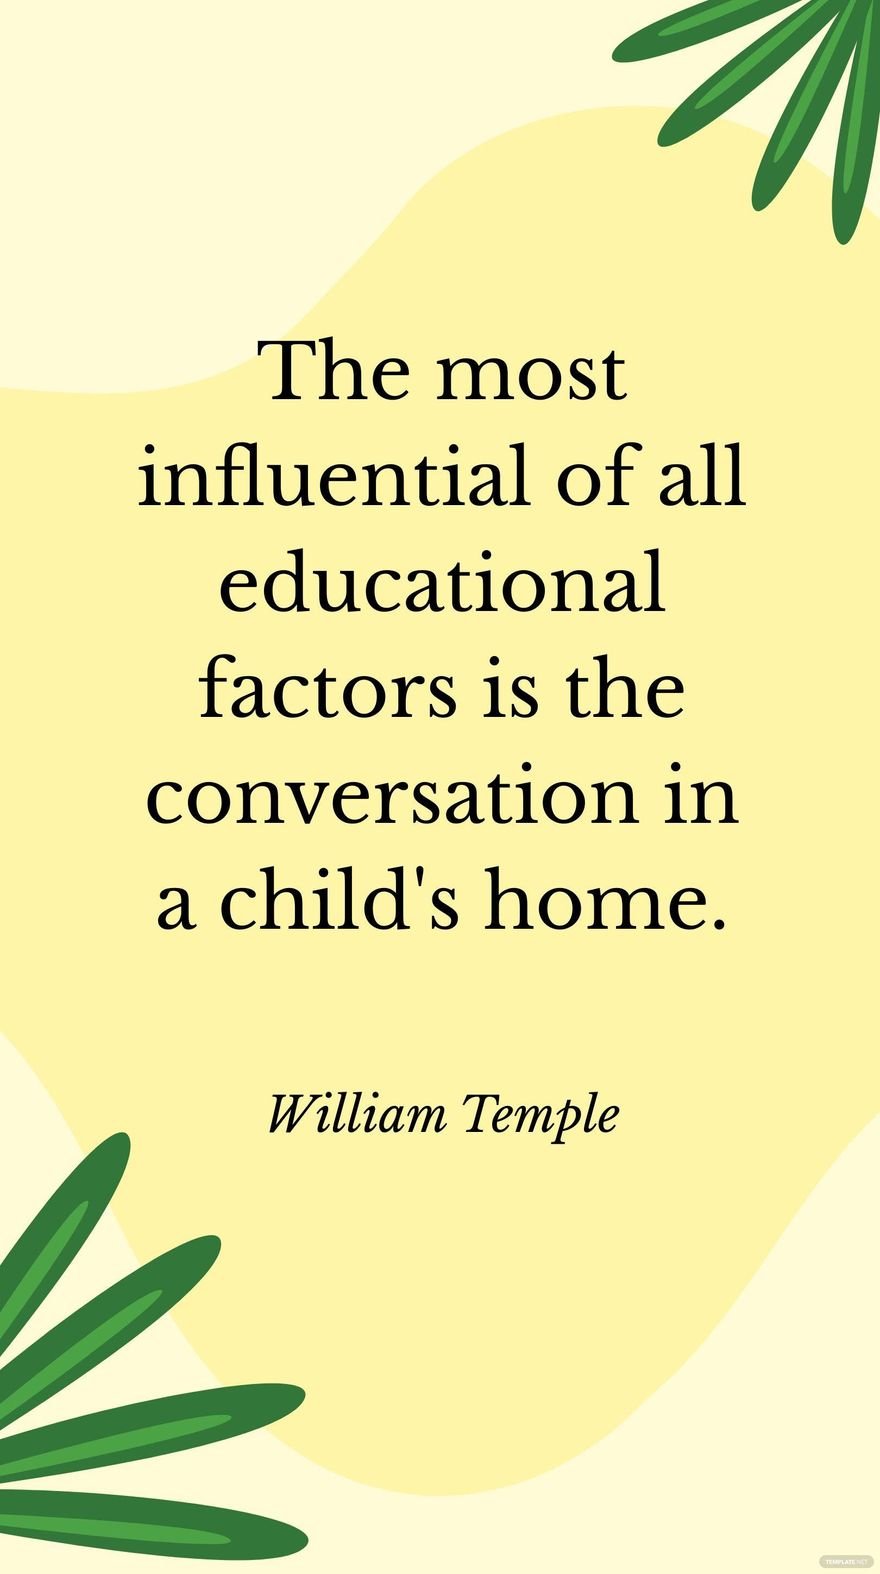 William Temple - The most influential of all educational factors is the conversation in a child's home.